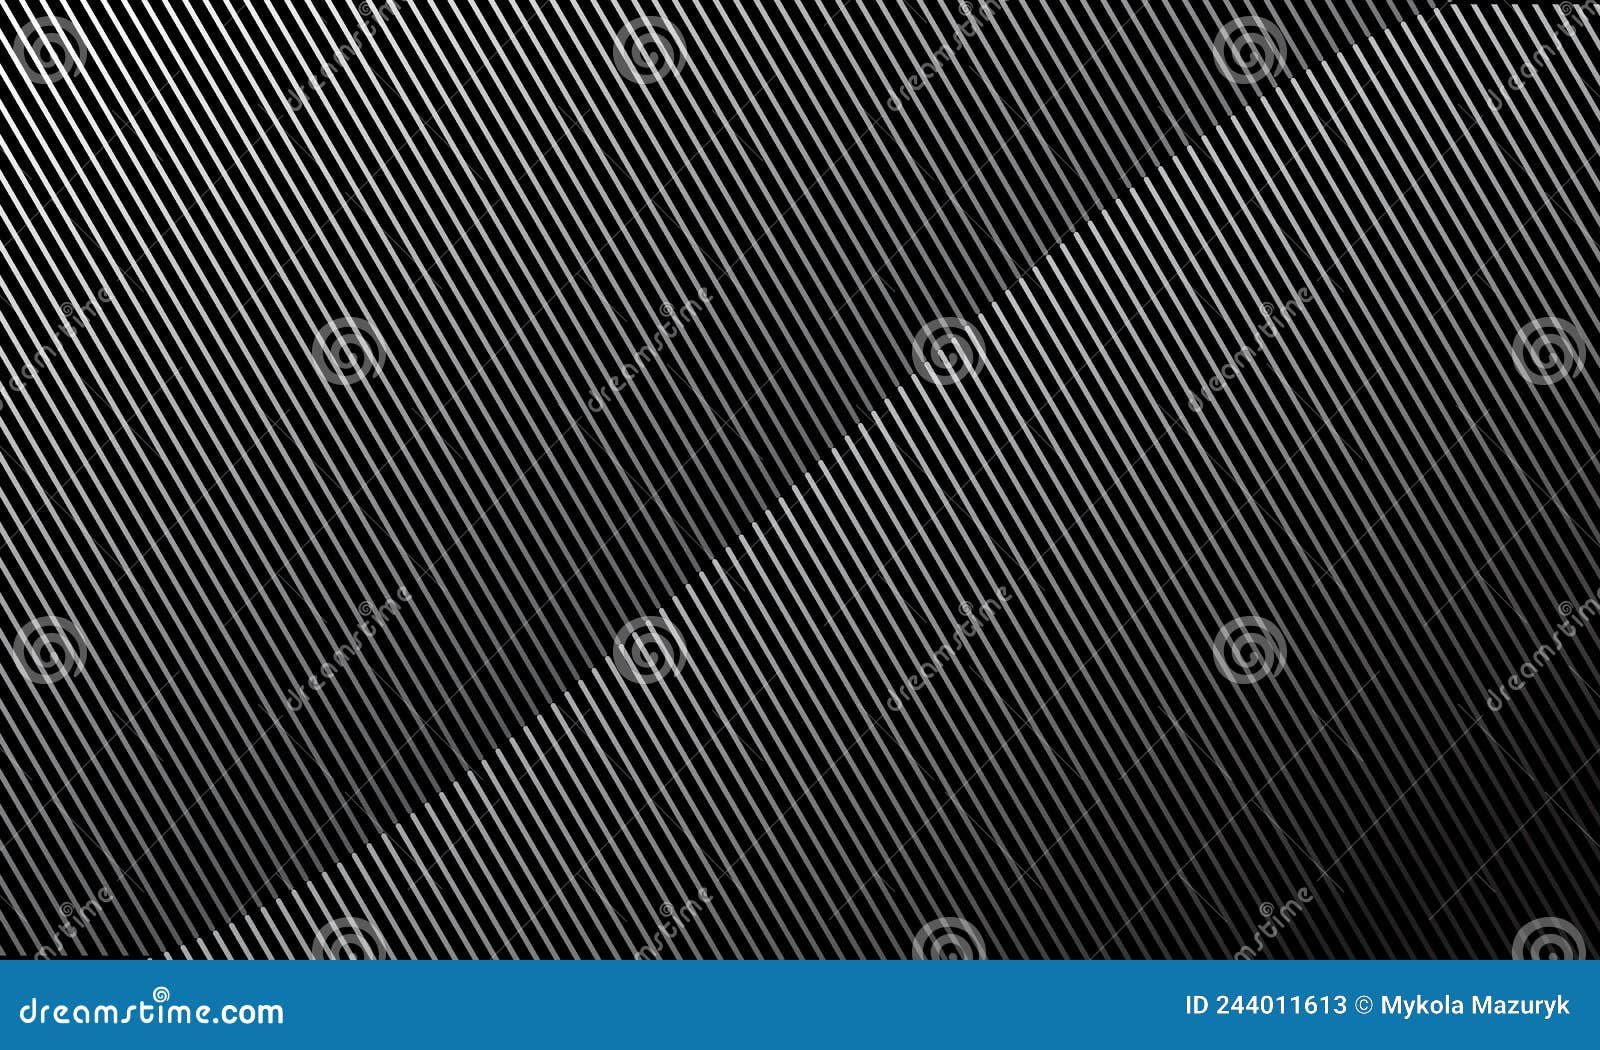 Diagonal Gray Lines with a Gradient. Abstract Art Lines Dark Background ...